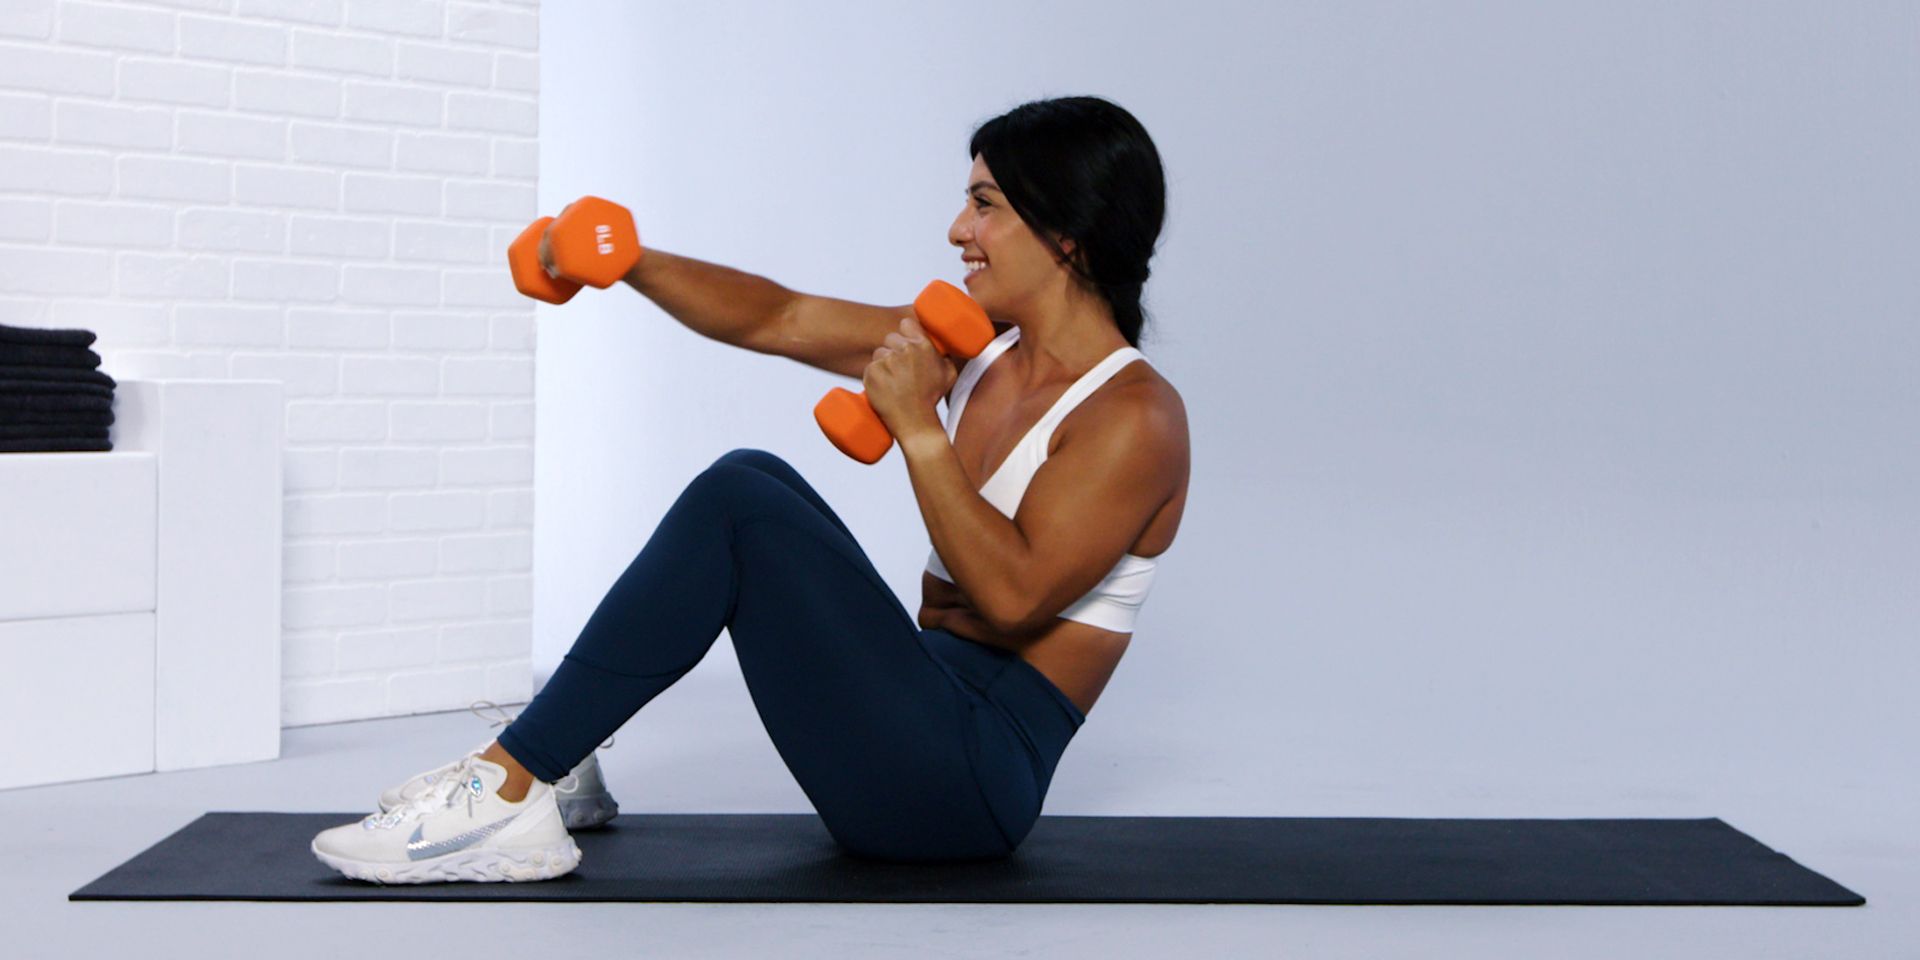 Upper Body Strength with Core Stability Supersets with an Exercise Ball